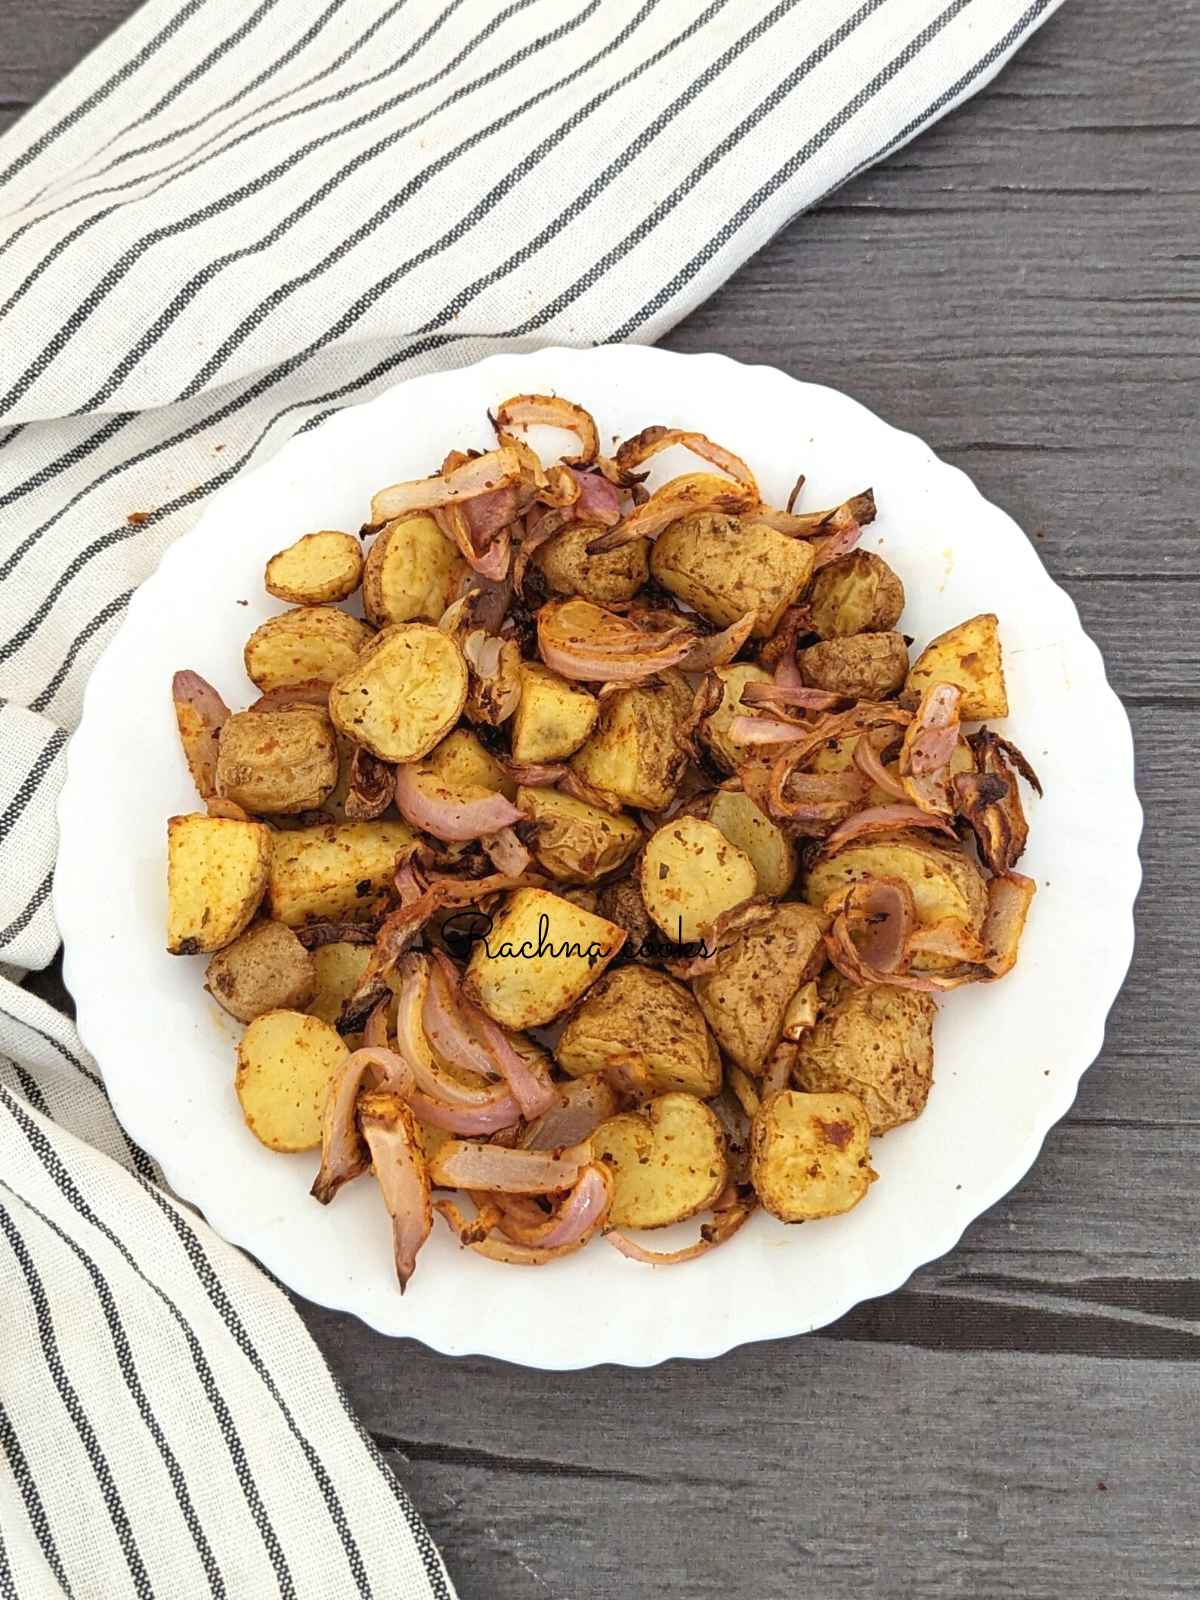 Crispy air fried potatoes and onions served on a white plate.